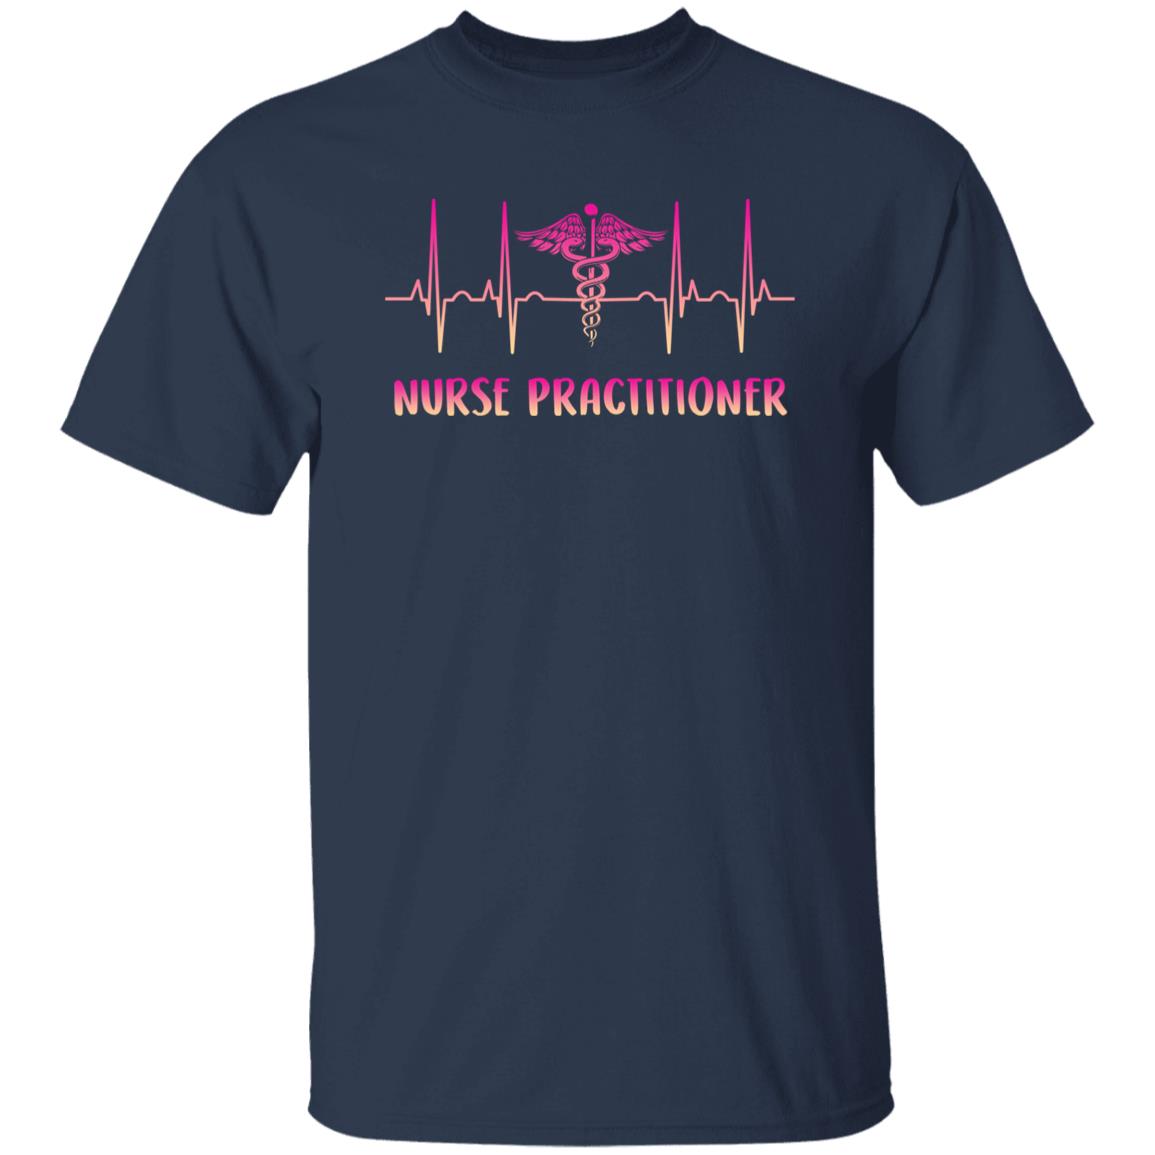 Nurse practitioner Heartbeat T-Shirt NP Family Nurse Practitioner heart beat Unisex Tee Black Navy Dark Heather-Family-Gift-Planet